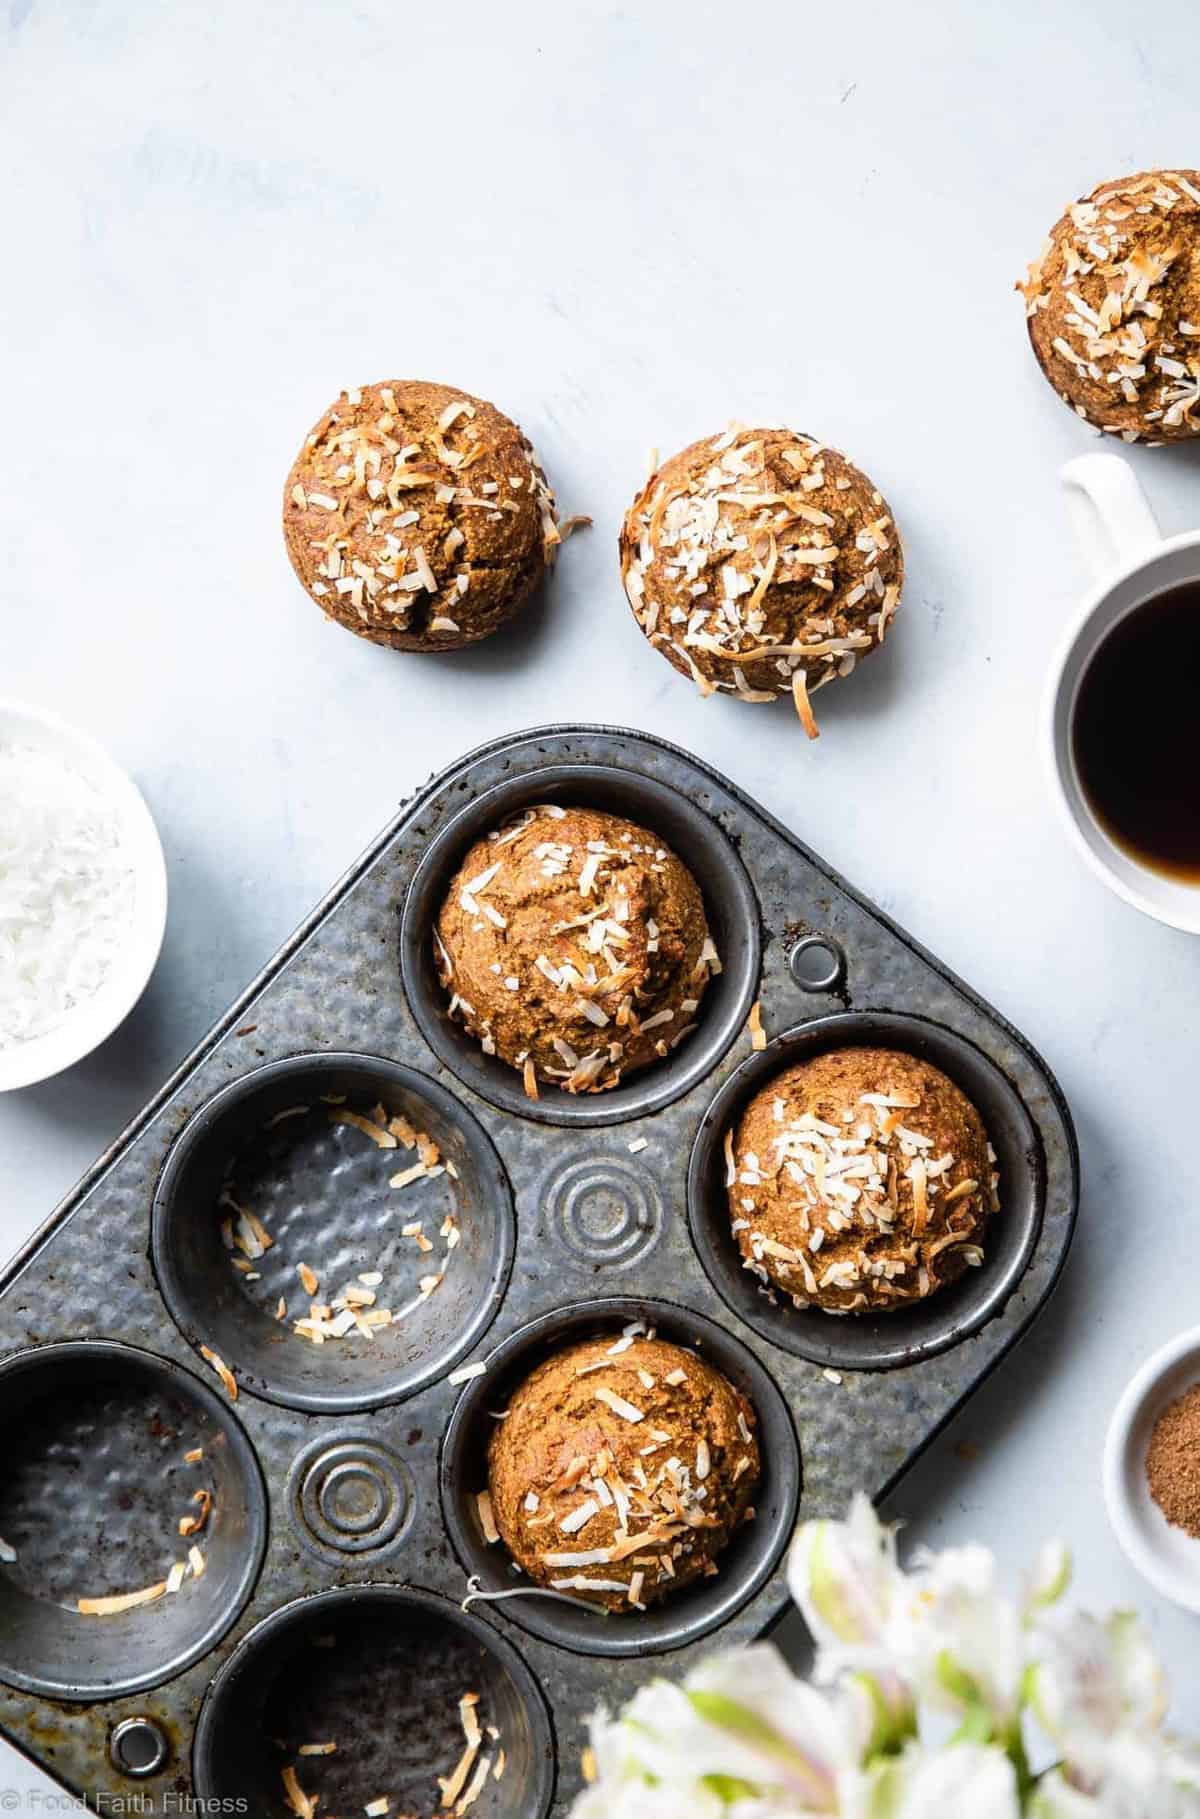 Sugar Free Gluten Free Oatmeal Carrot Muffins - These easy carrot muffins are naturally sweetened with dates and have a surprise, spicy-sweet kick! SO light and fluffy! Gluten free, healthy and tasty! | #Foodfaithfitness | #Glutenfree #Dairyfree #Healthy #Sugarfree #Muffins